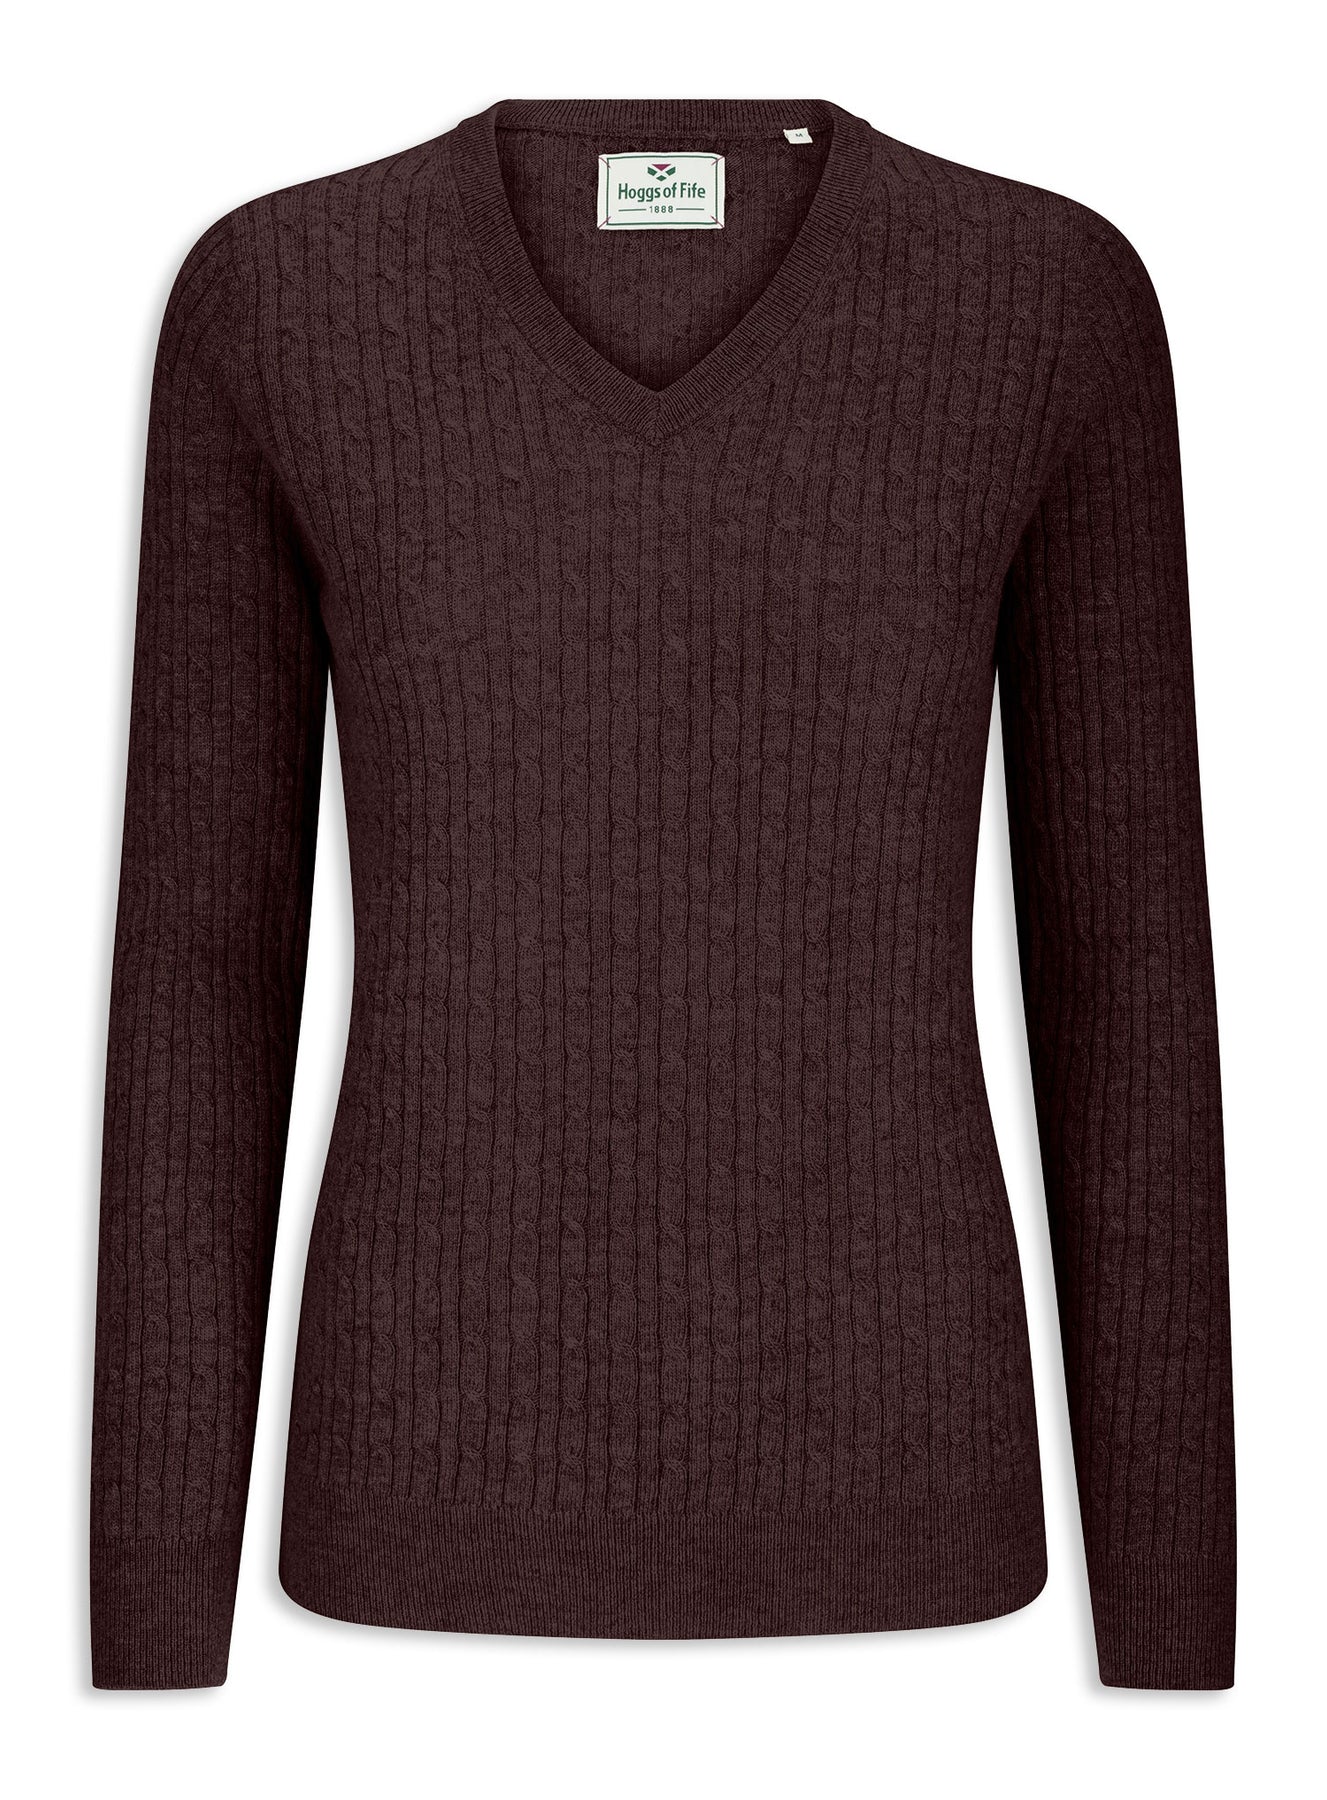 Hoggs of Fife Lauder Ladies Cable V-Neck Sweater